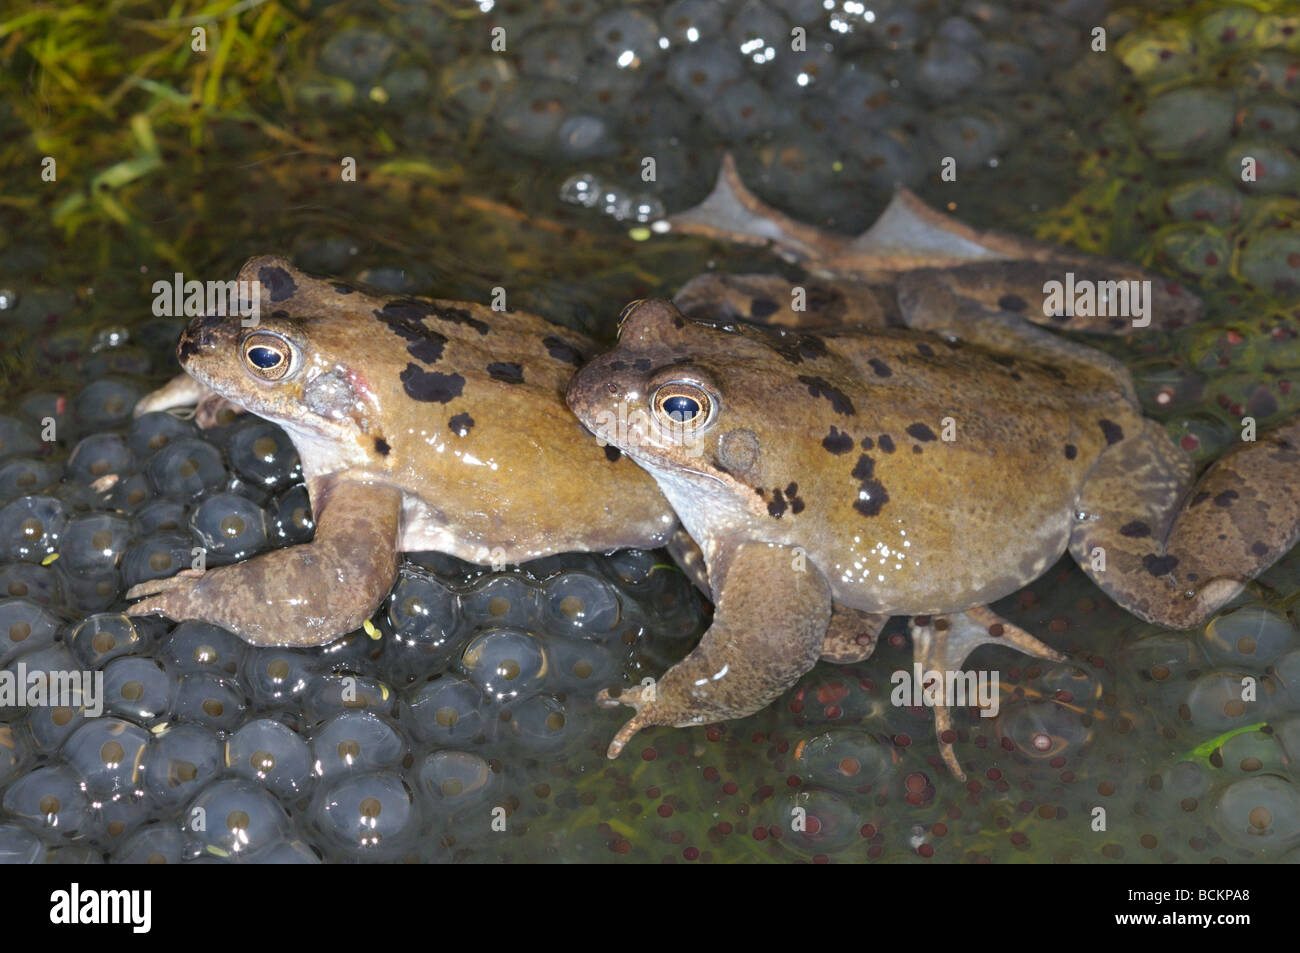 Garden wildlife Frogs common frog rana temporaria adults in mating activity in garden pond in spring March Stock Photo